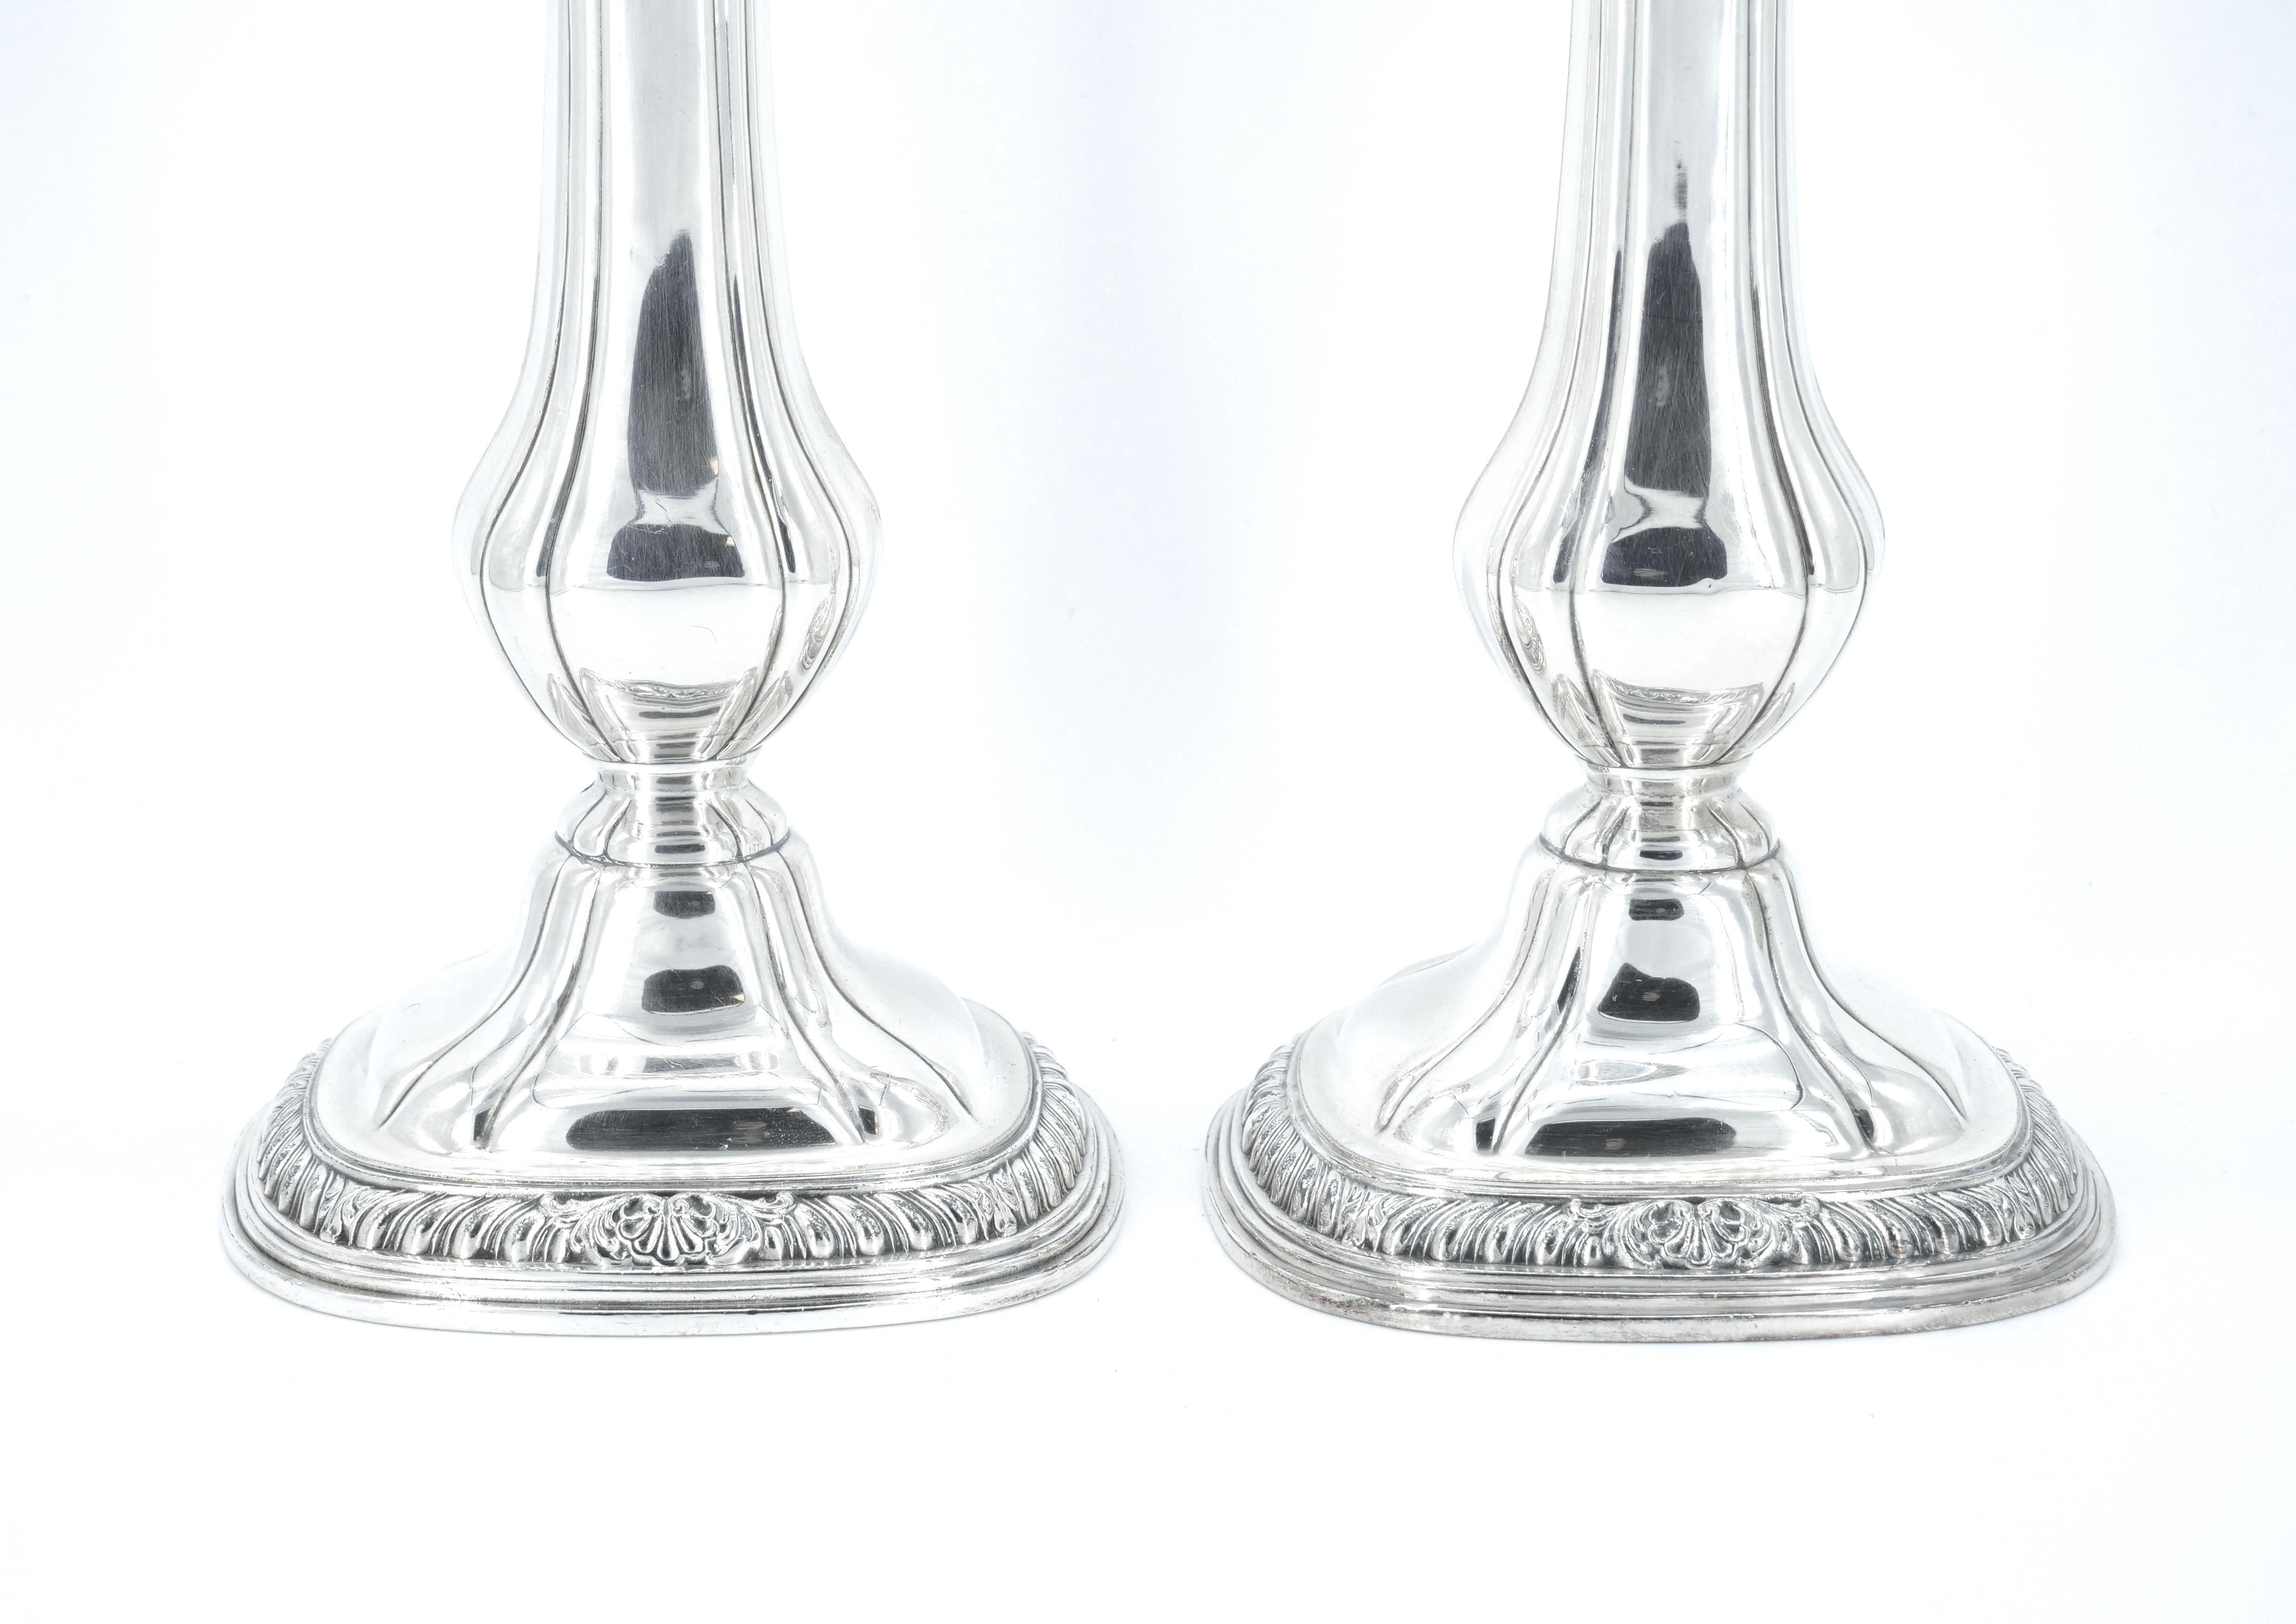 American Pair Gorham Silverplate Candlesticks in the English Regency Style For Sale